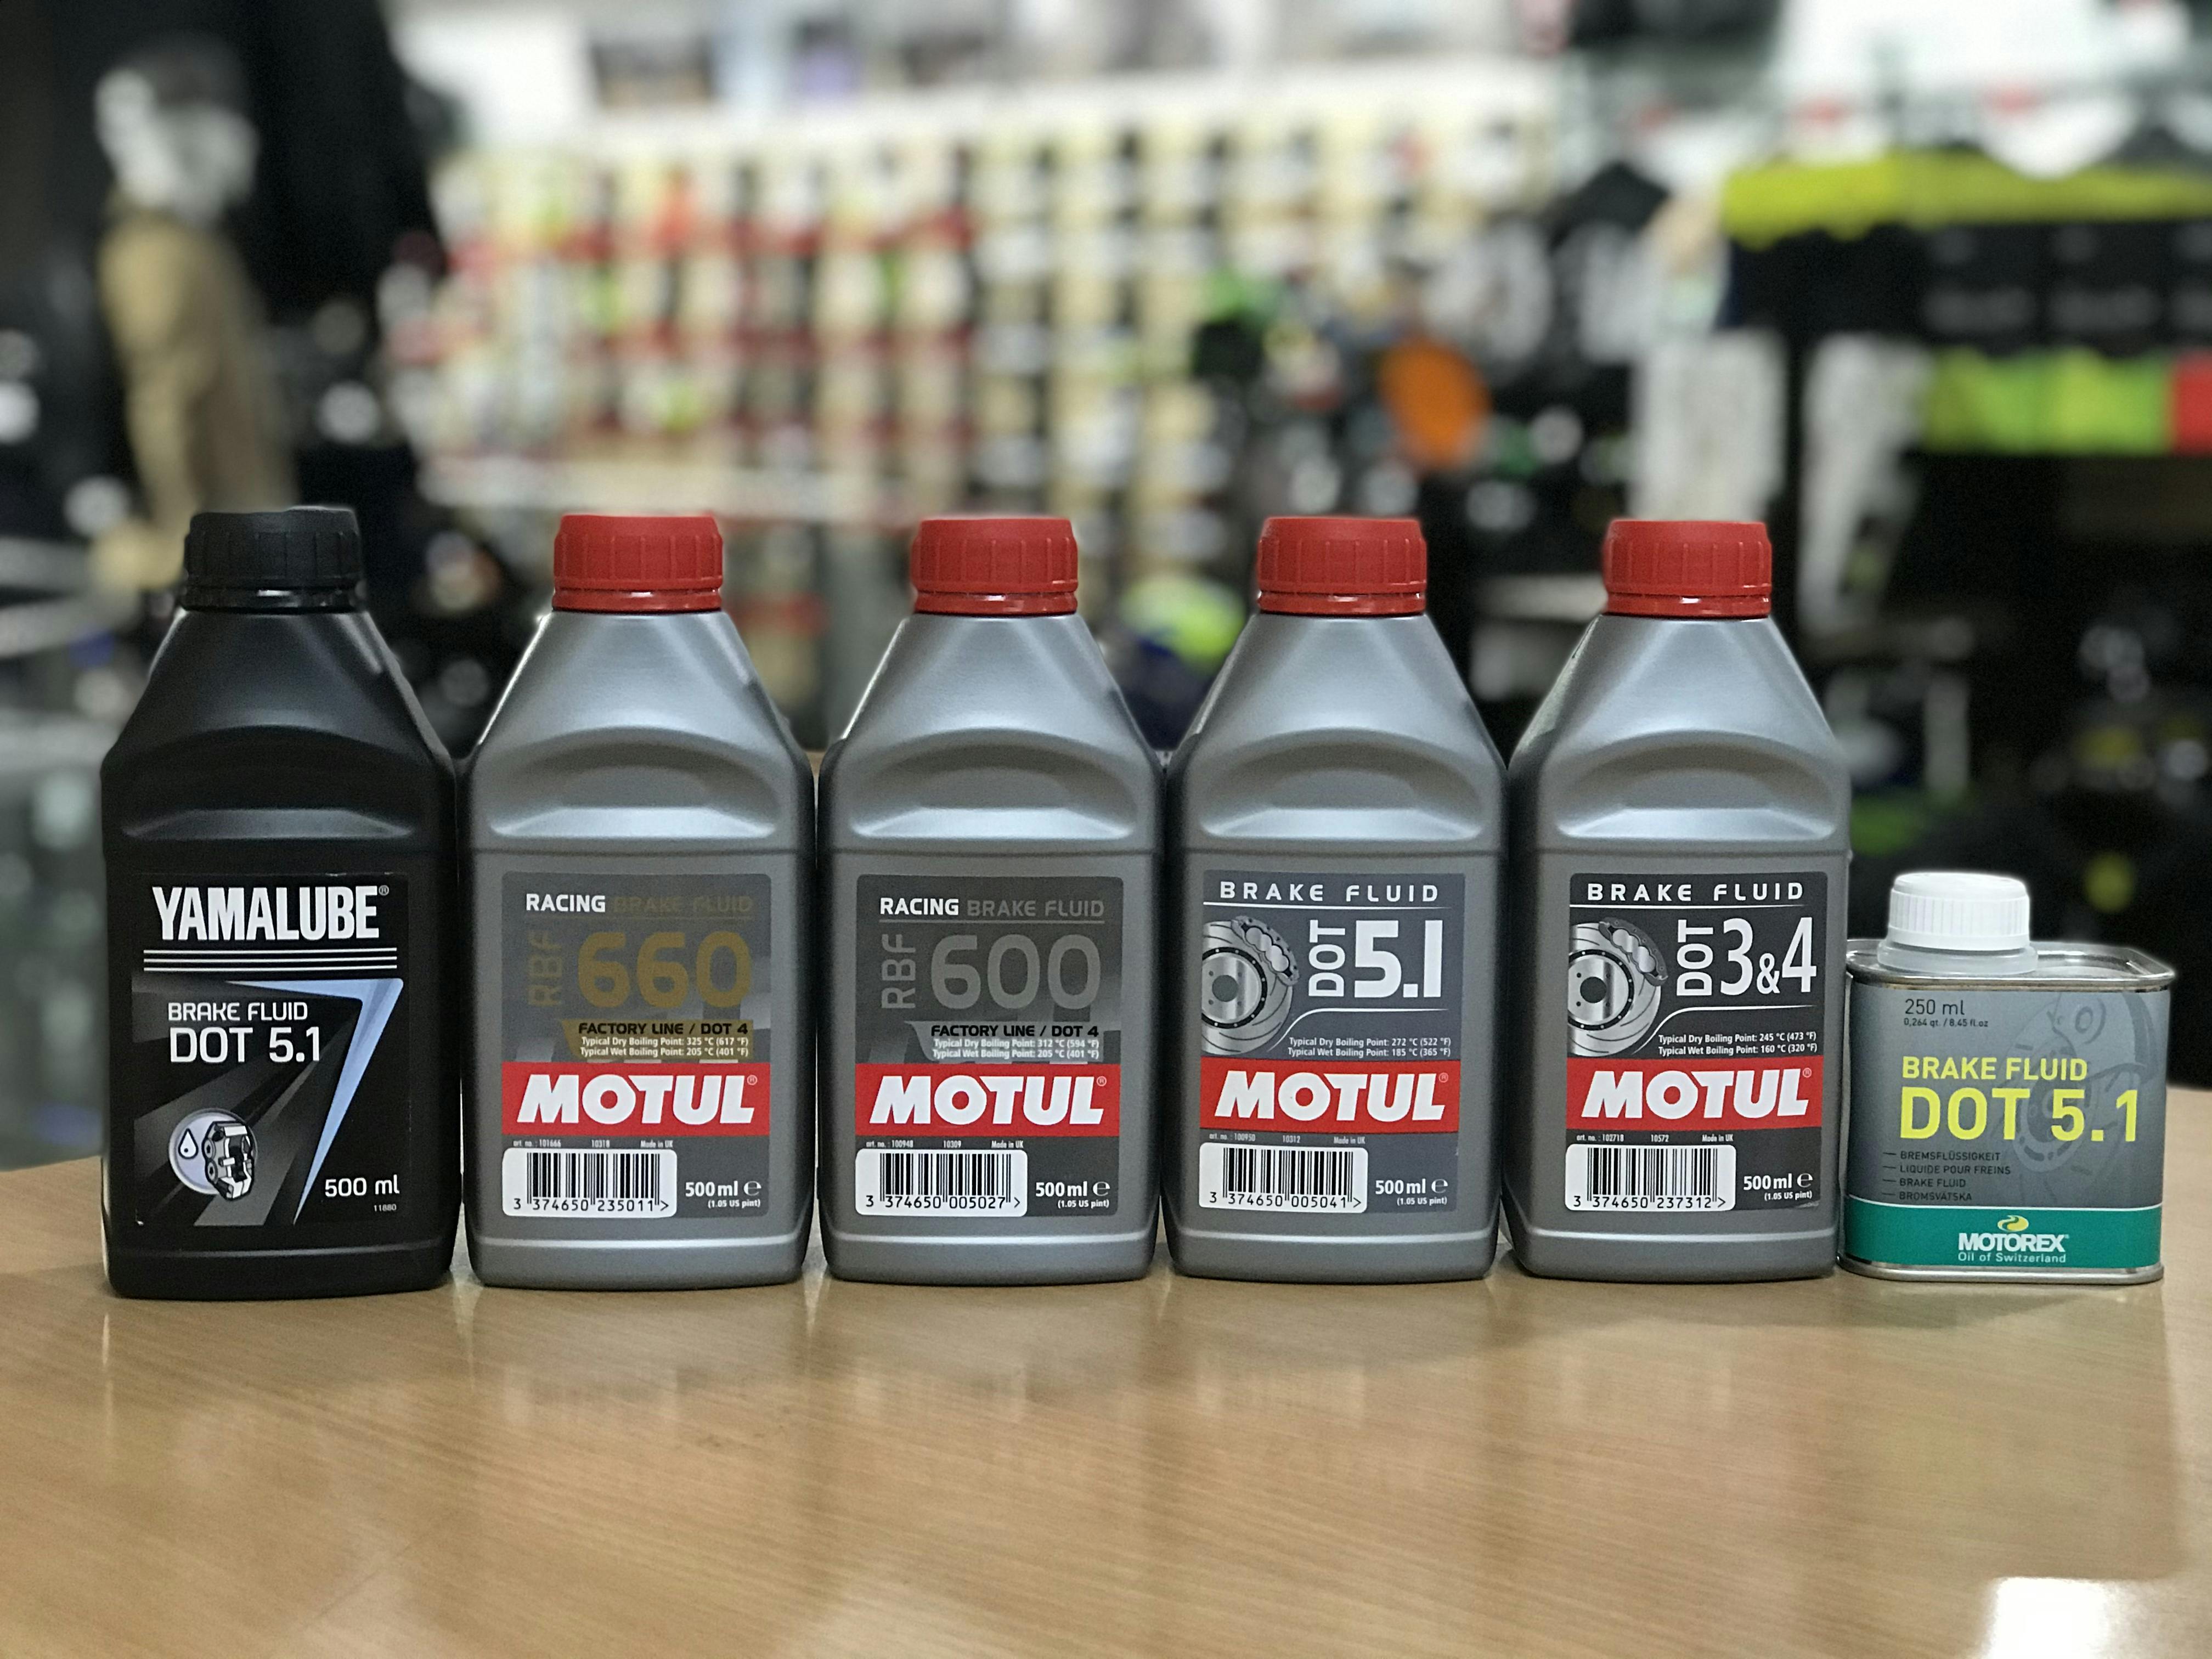 Different bottles of different types of brake fluid